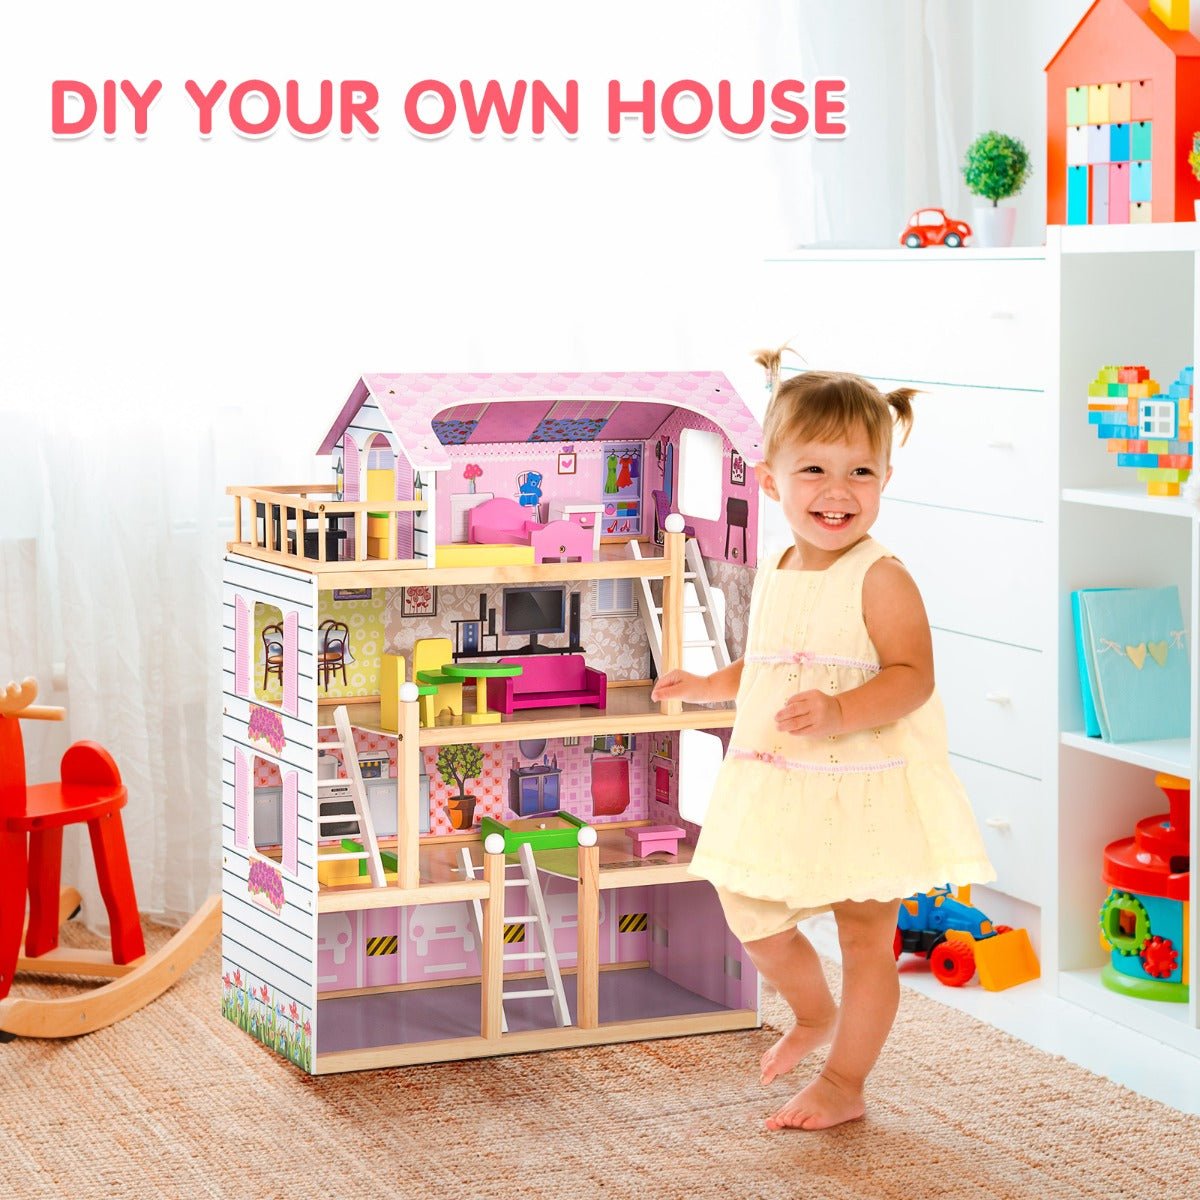 4-Storey Doll House with 13 Furniture Sets: Igniting Childhood Imagination